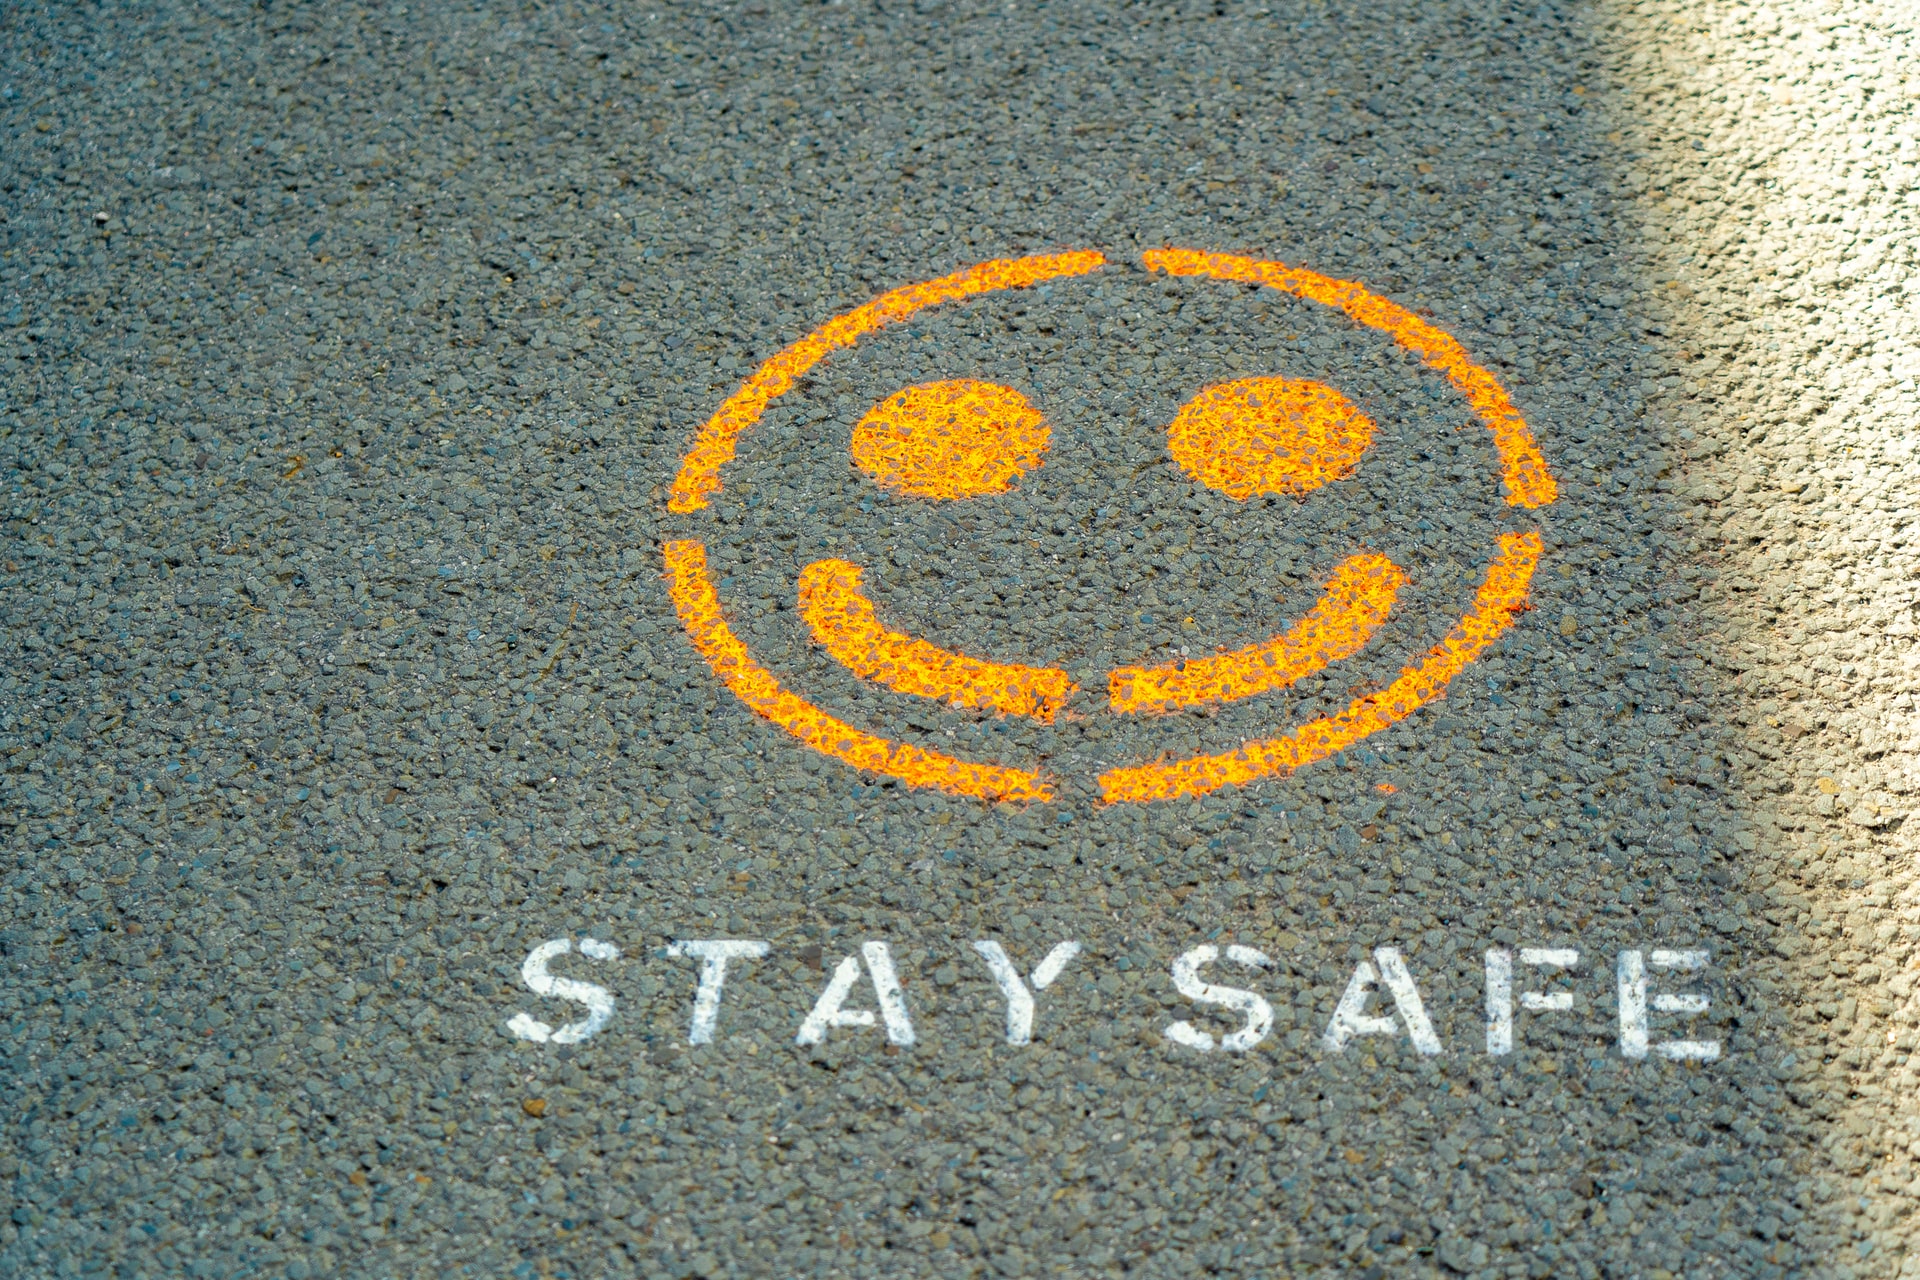 A road marking of a smiley face with the words "Stay safe" underneath it